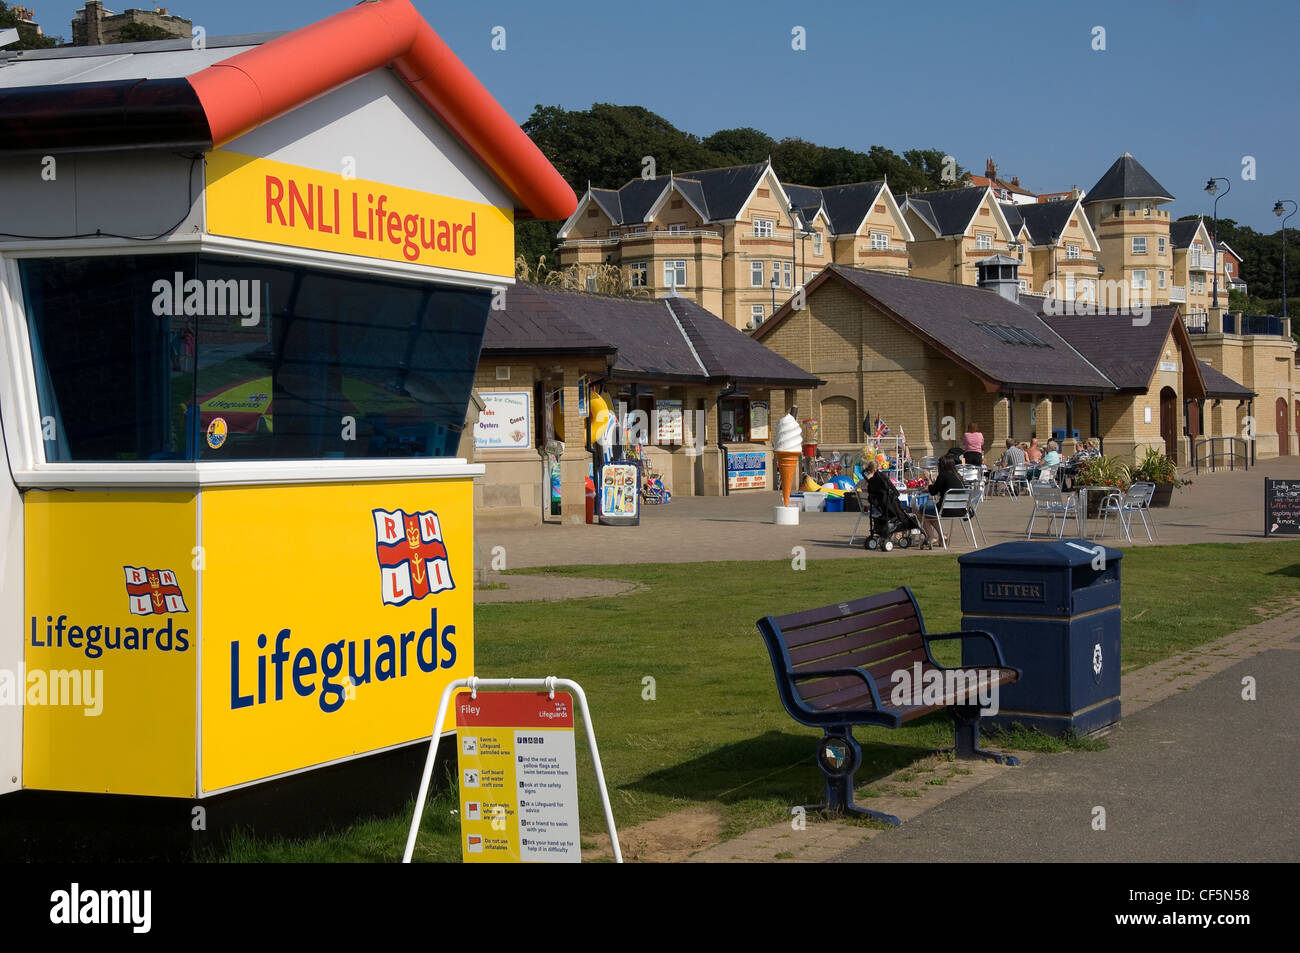 RNLI Lifeguard station on the promenade at Filey. Stock Photo